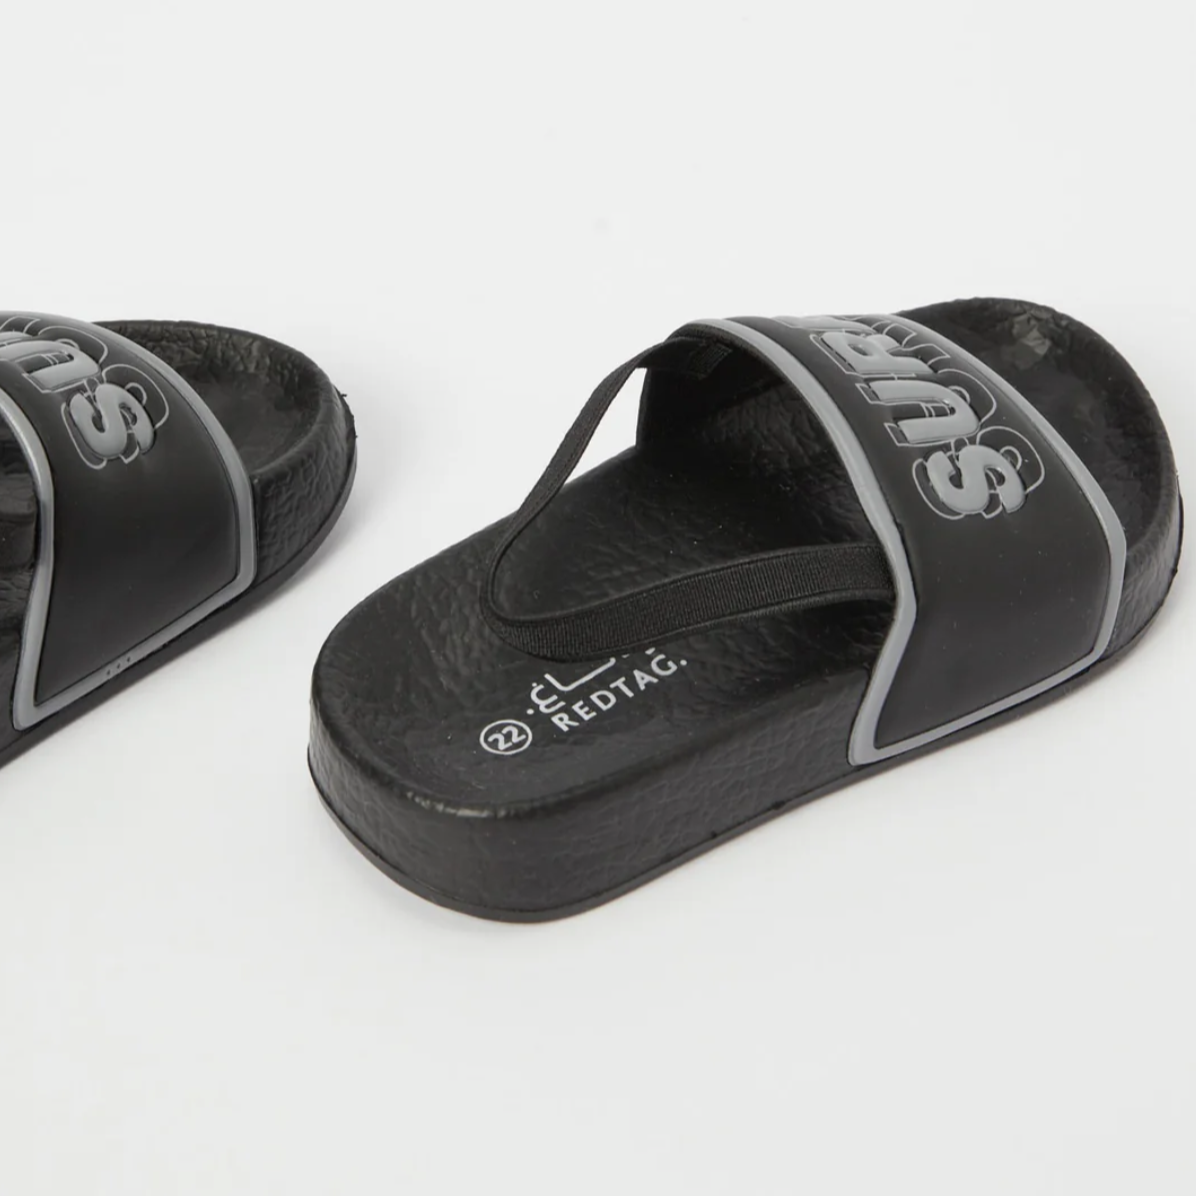 REDTAG "SURF" Slippers